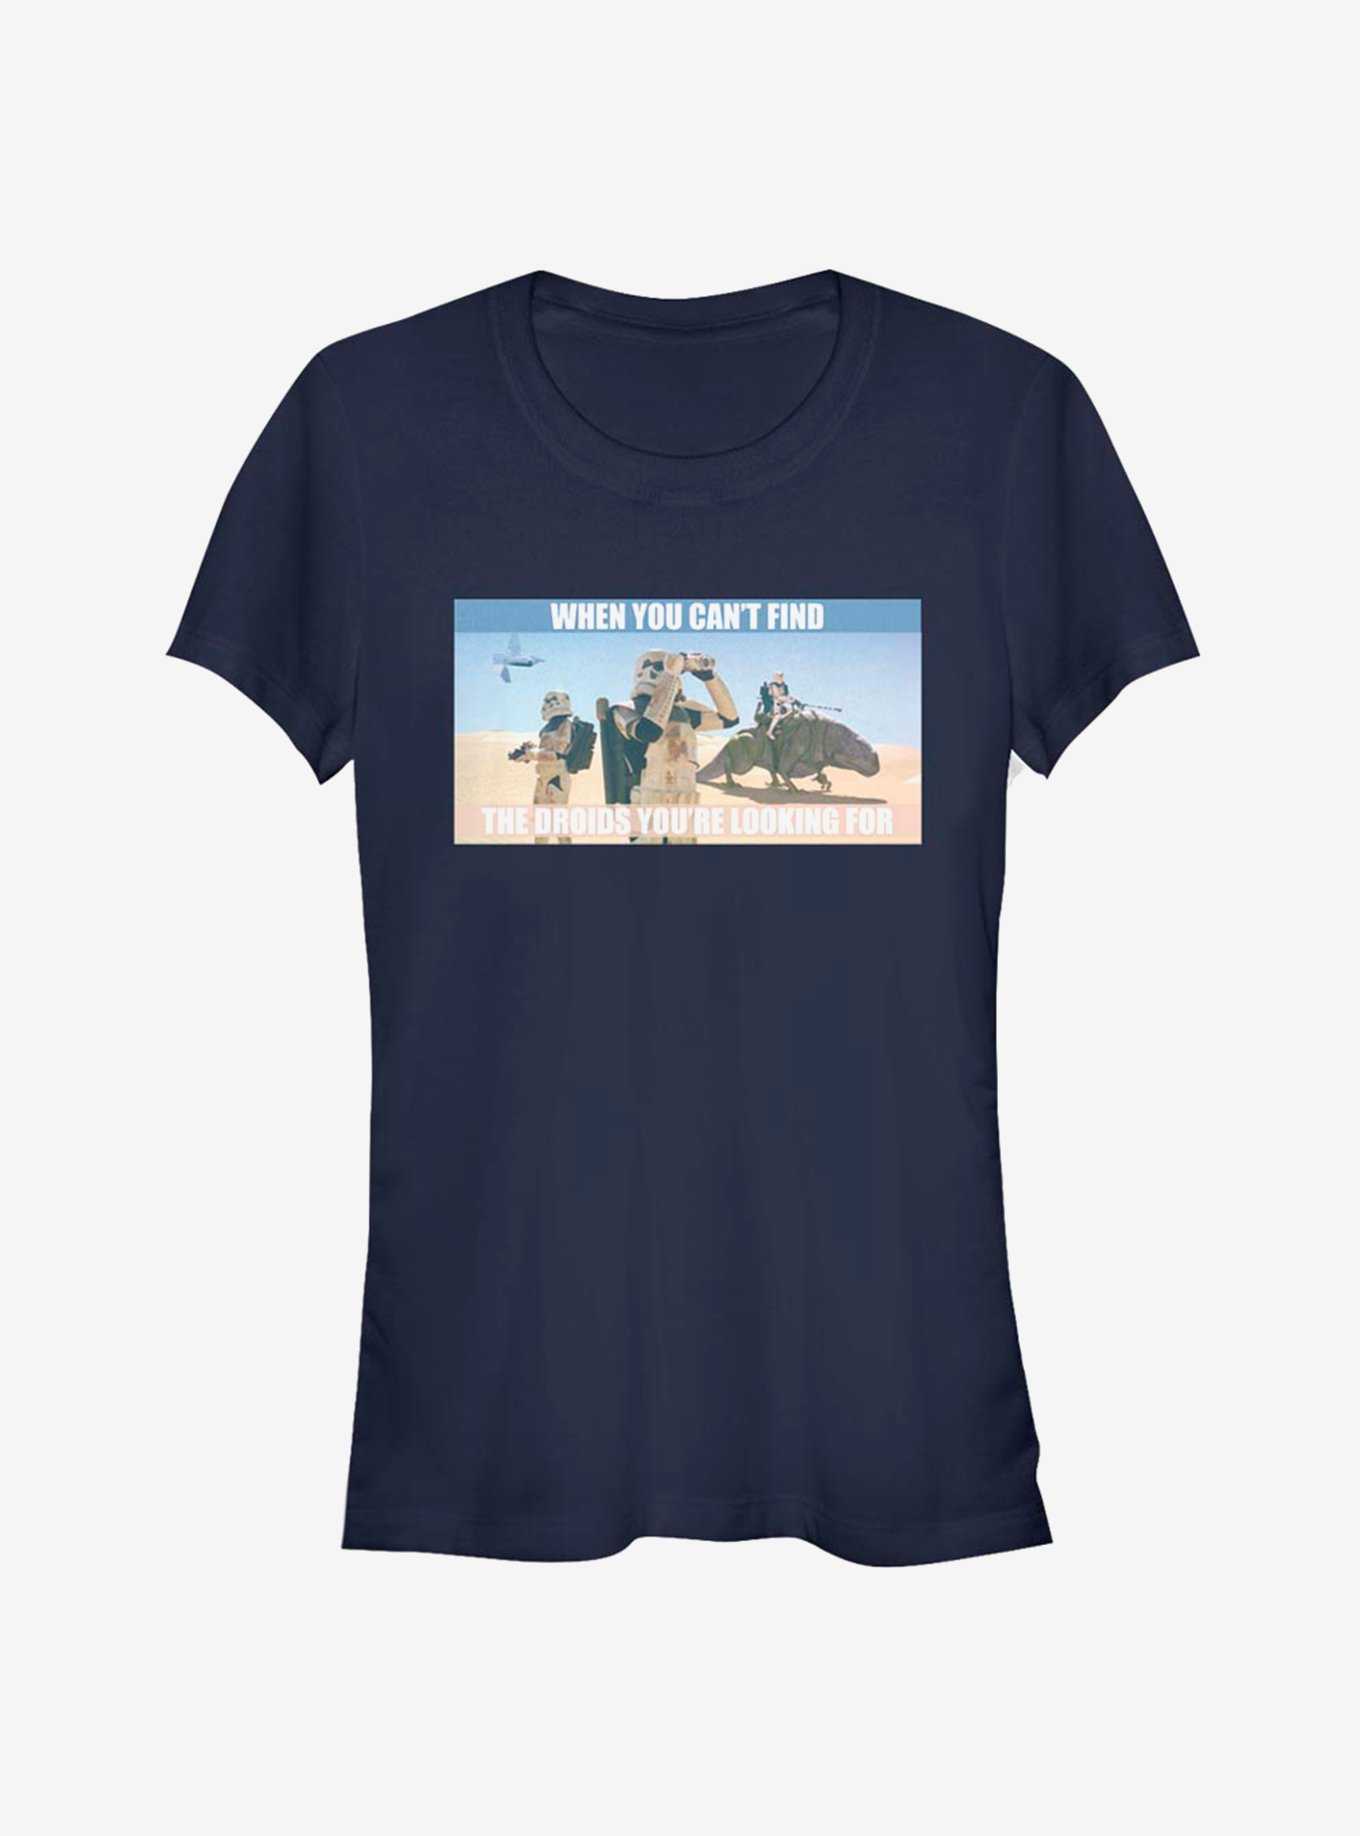 Star Wars Cant Find The Droids Girls T-Shirt, , hi-res